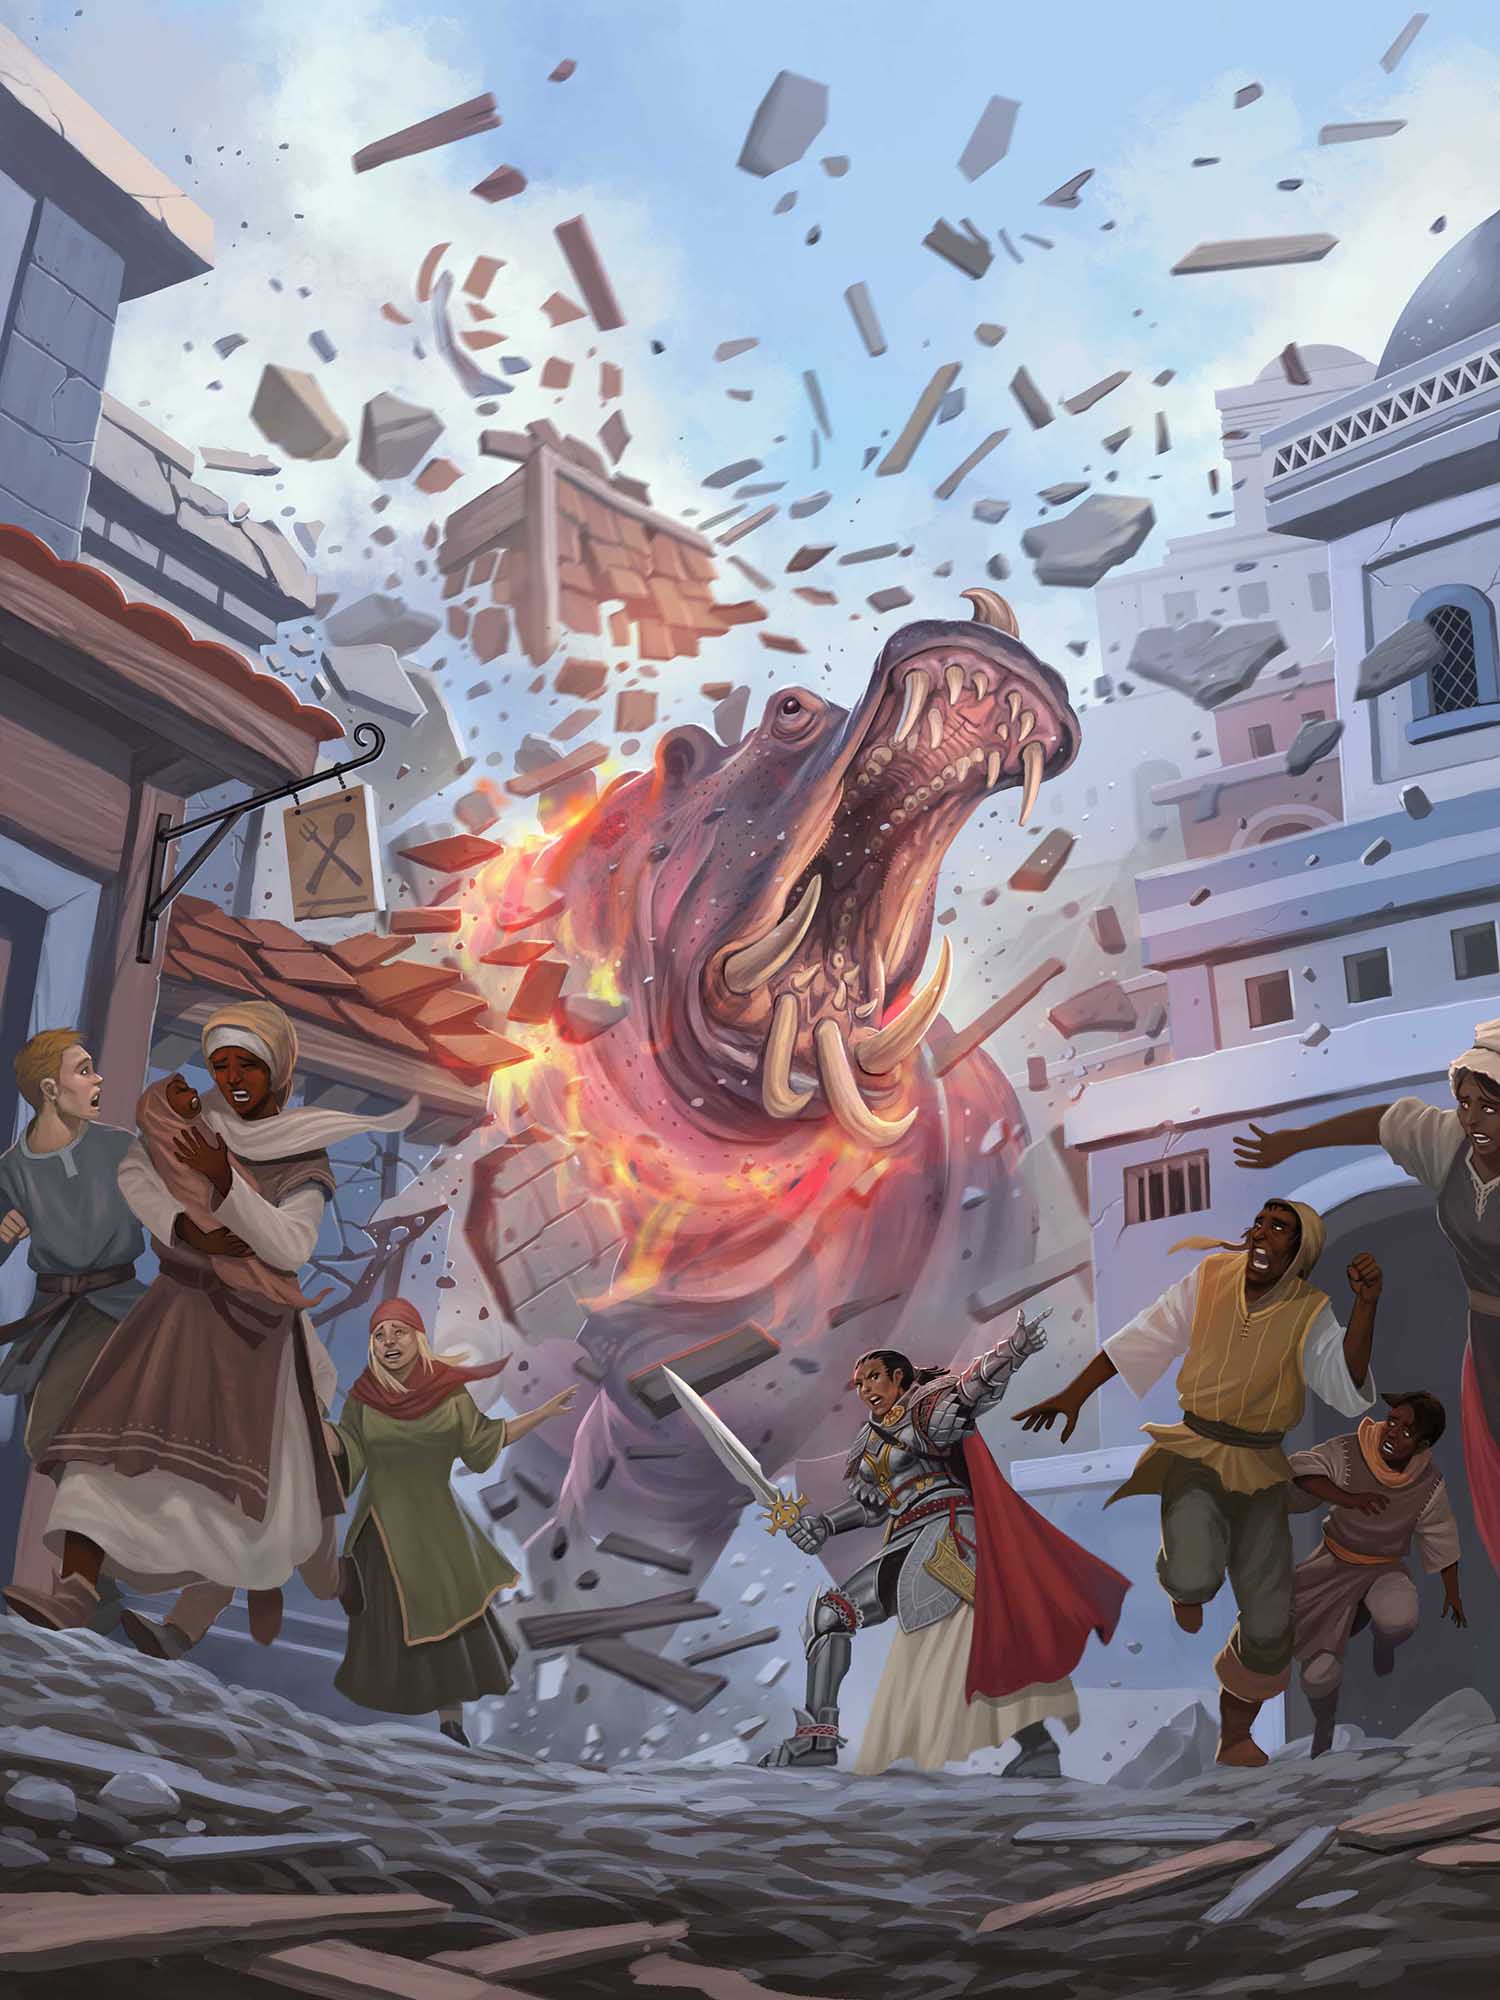 A large hippo-like creature rampages through a crowded street, breaking buildings as it moves. Pathfinder iconic, Seelah, stands before it, while urging civilians to runr